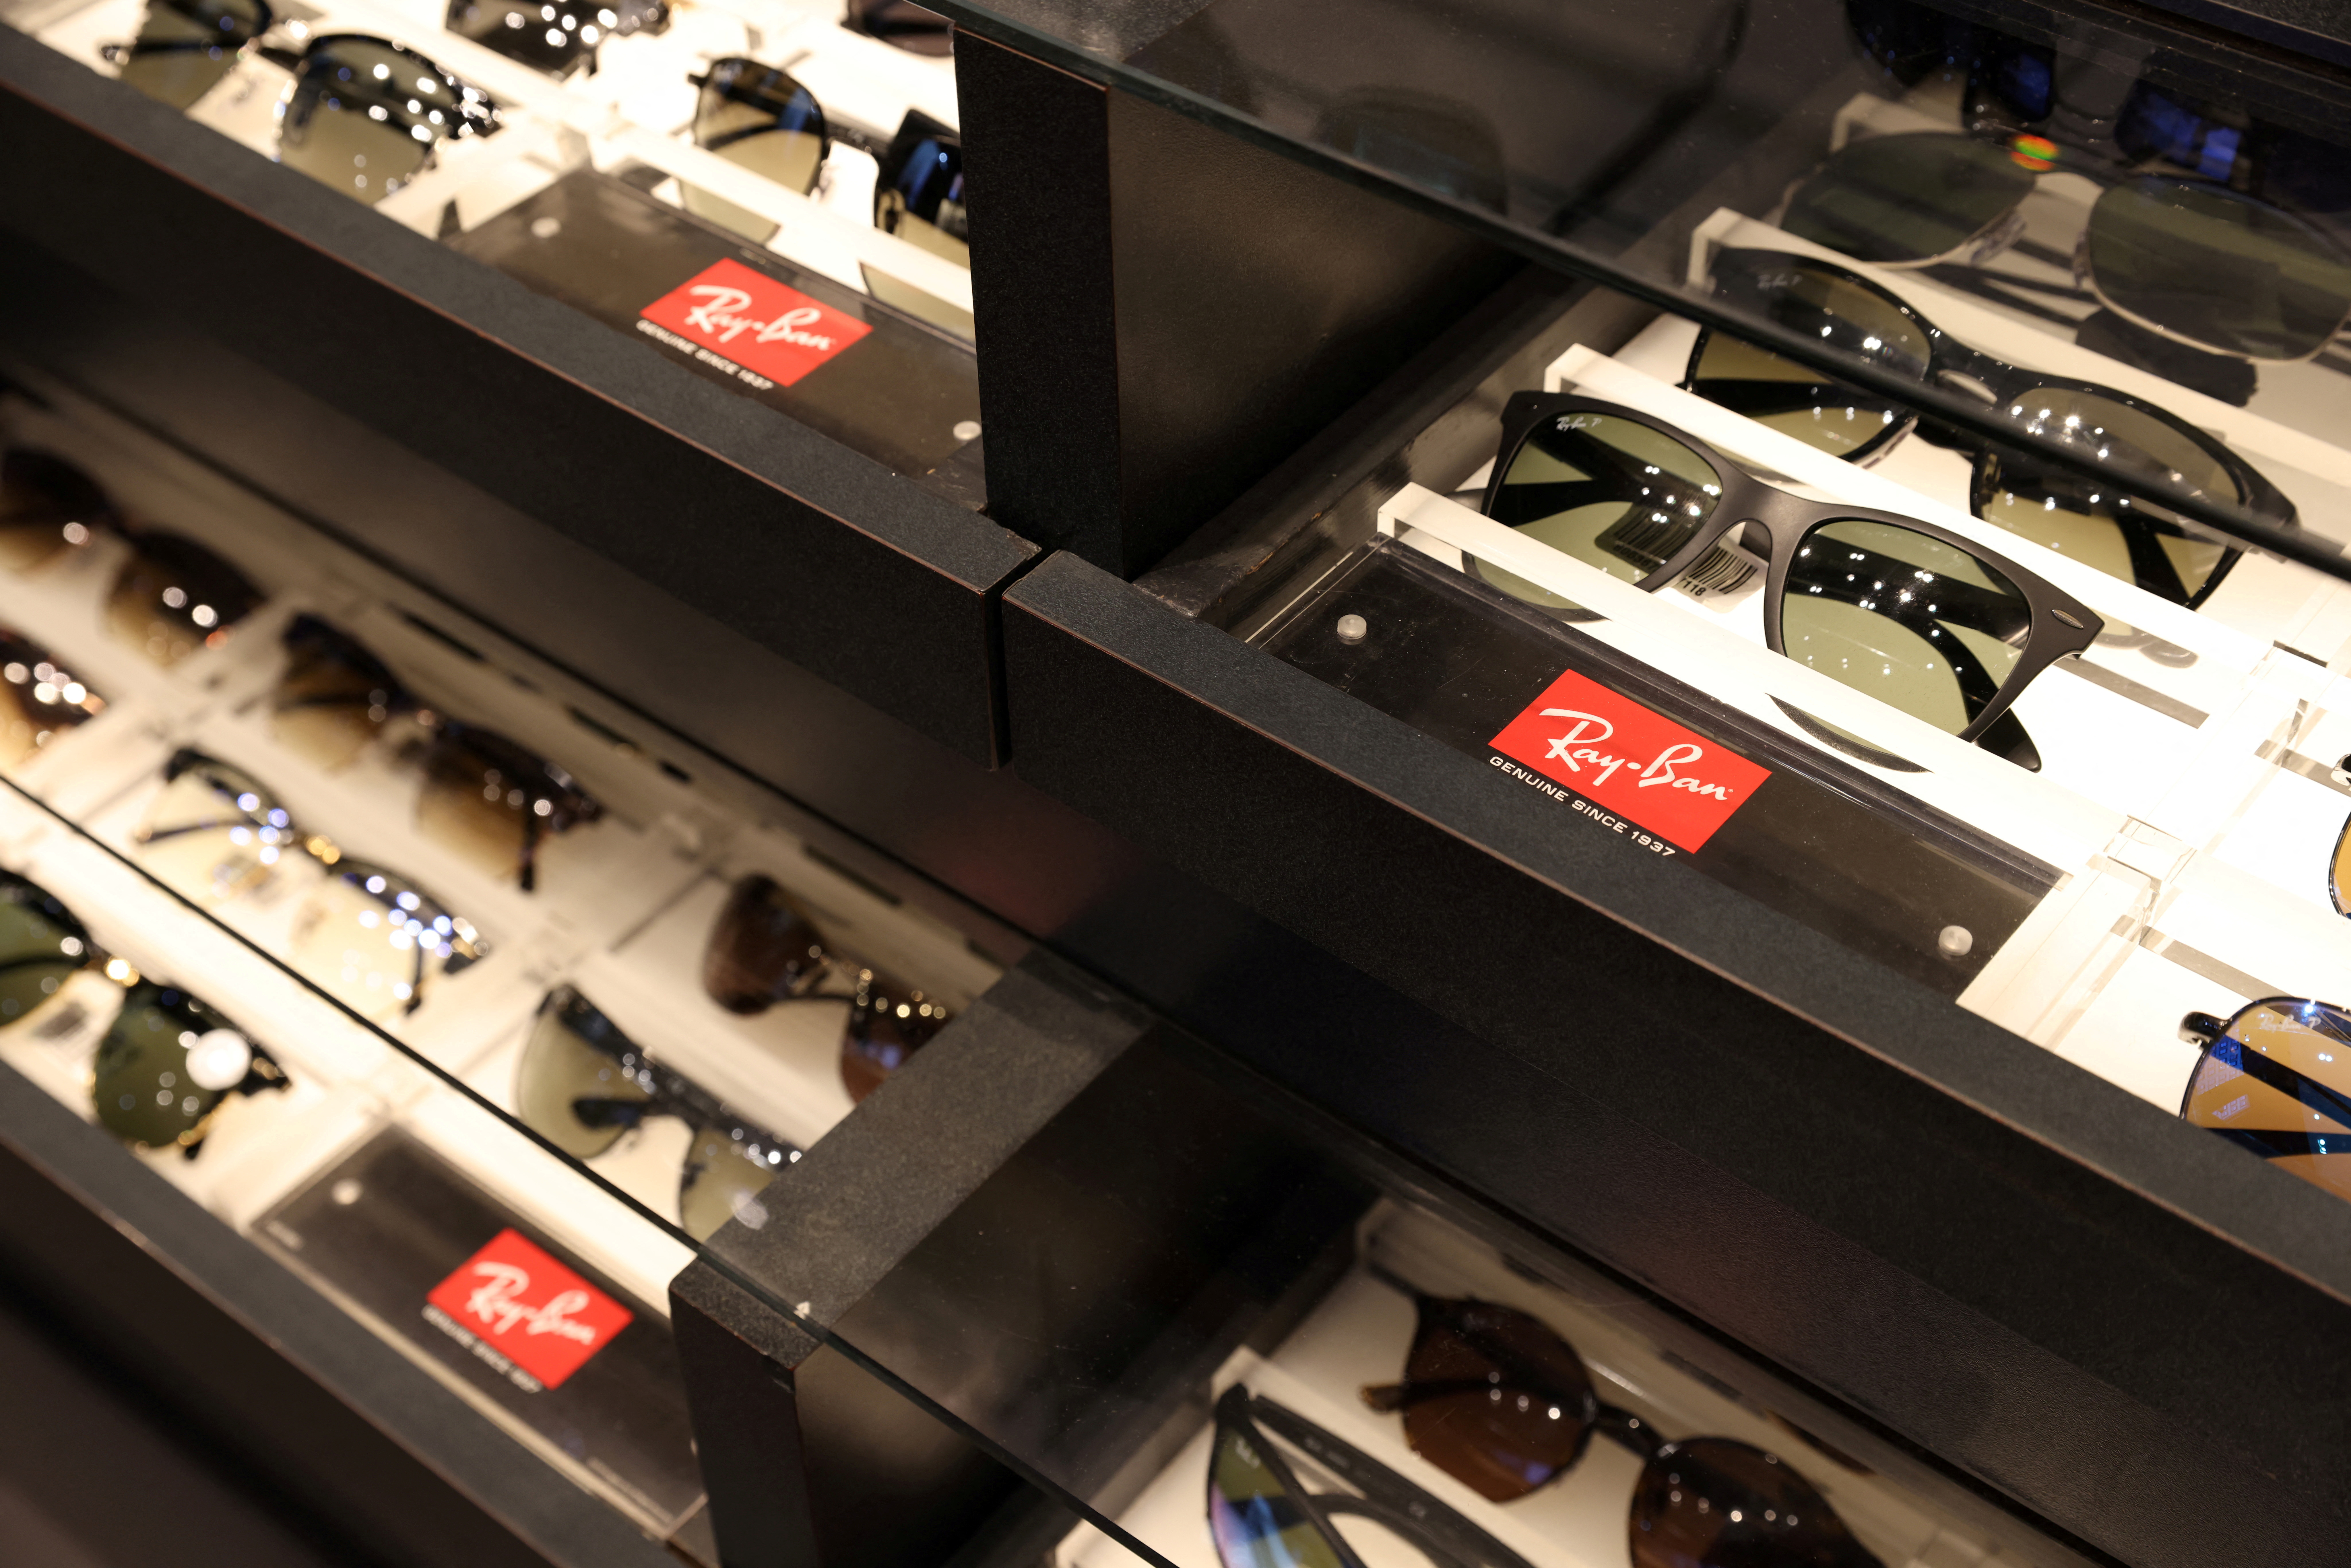 Ray-Ban sunglasses are pictured for sale in a Sunglass Hut, both brands owned by EssilorLuxottica SA, in Manhattan, New York City